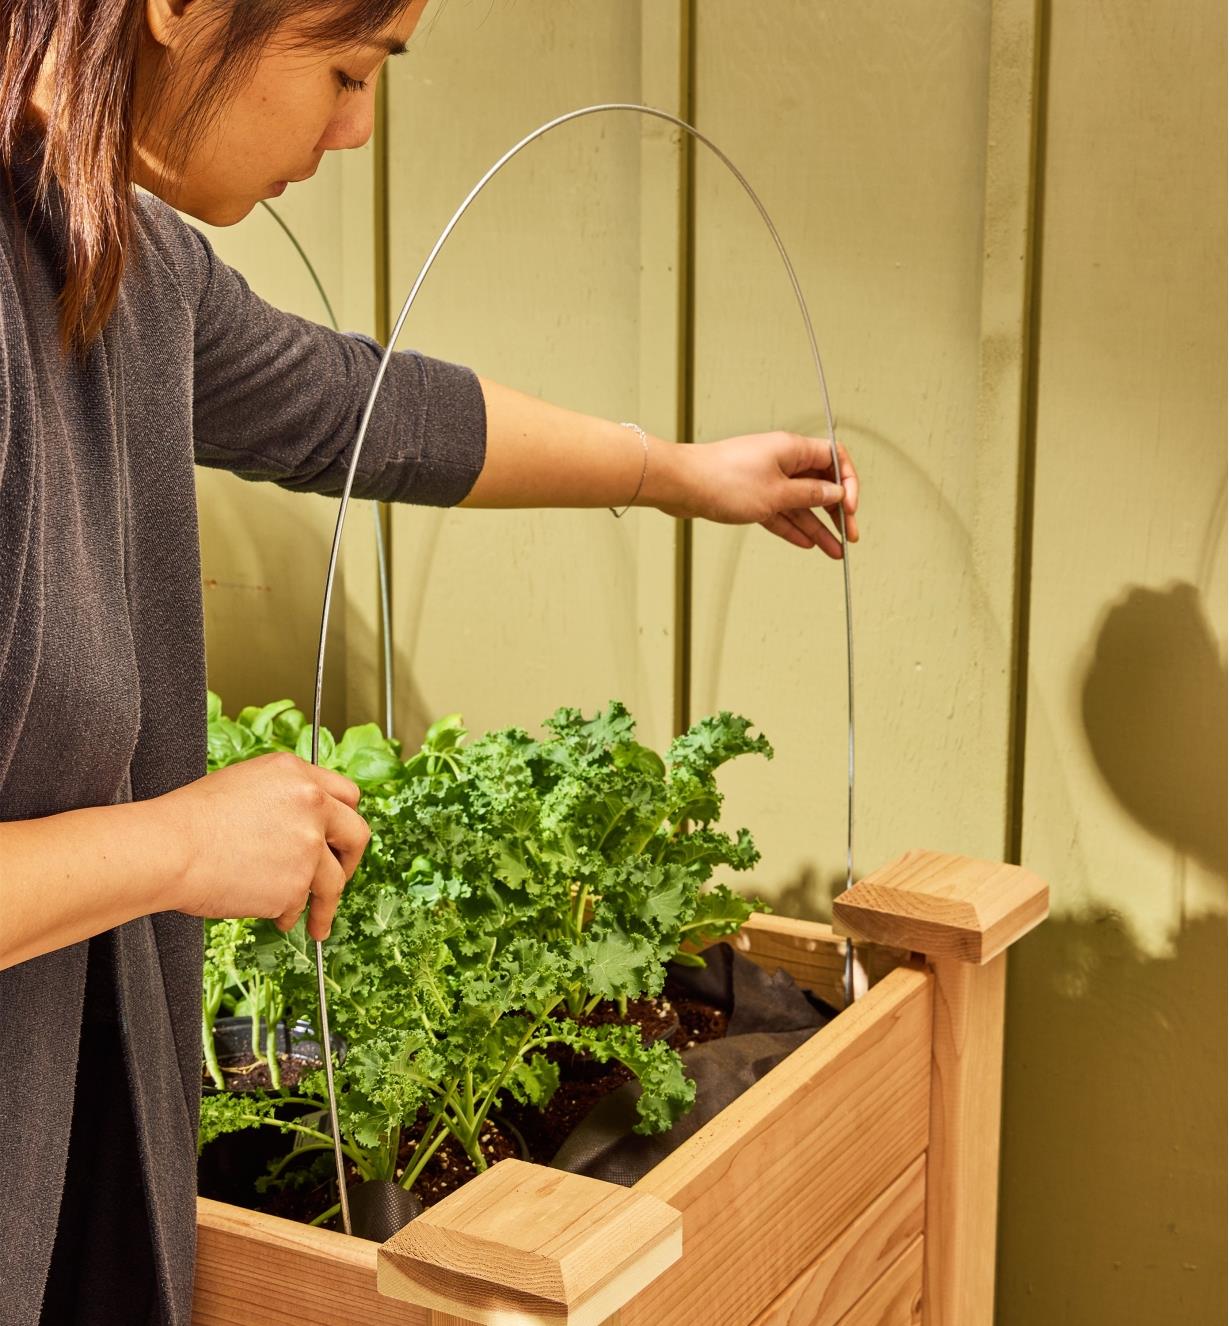 A garden hoop being placed in a raised garden bed with greens growing in it